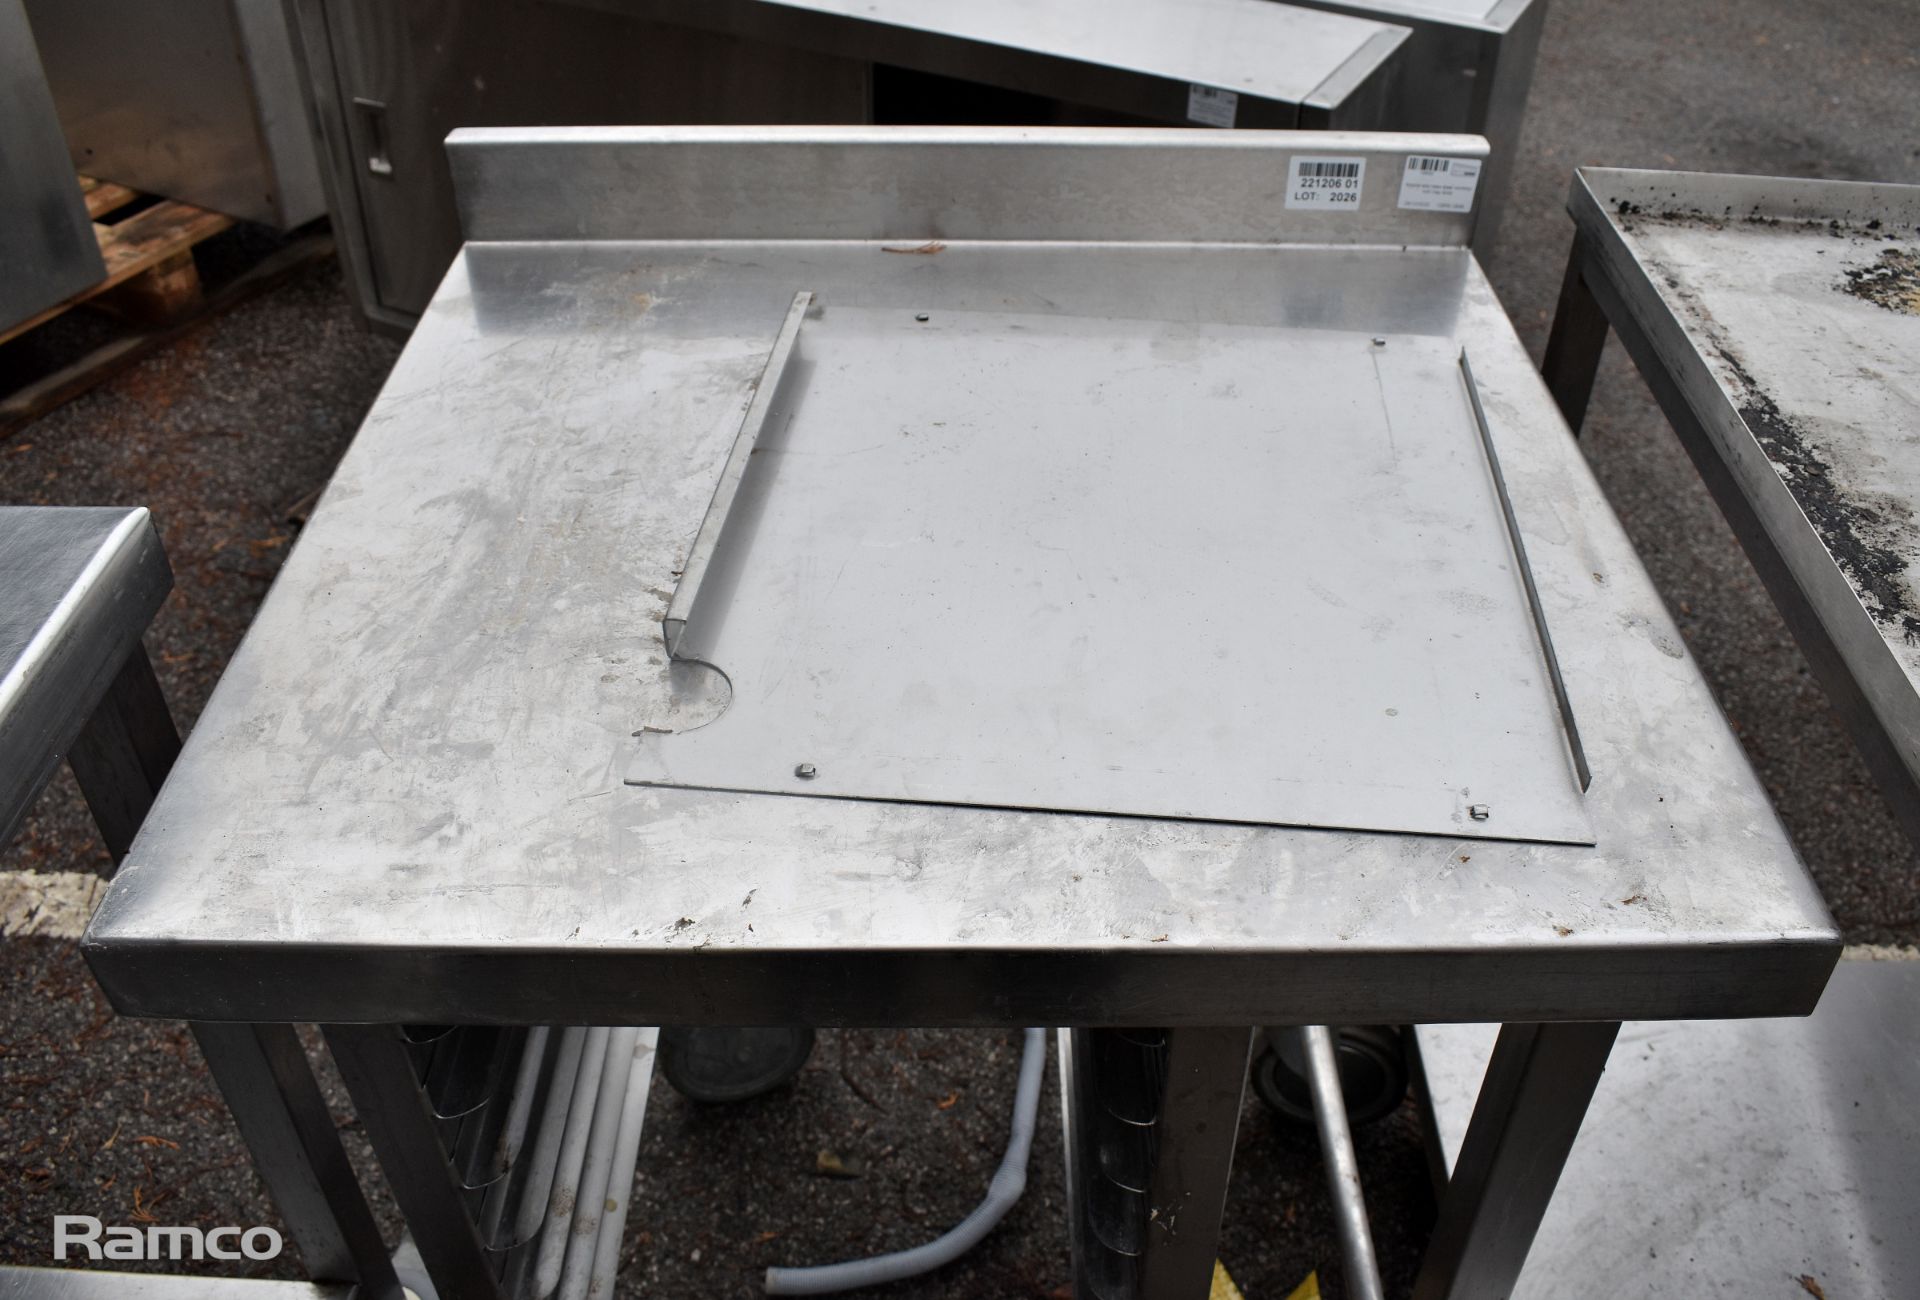 Mobile stainless steel worktop with tray slots - Image 2 of 3